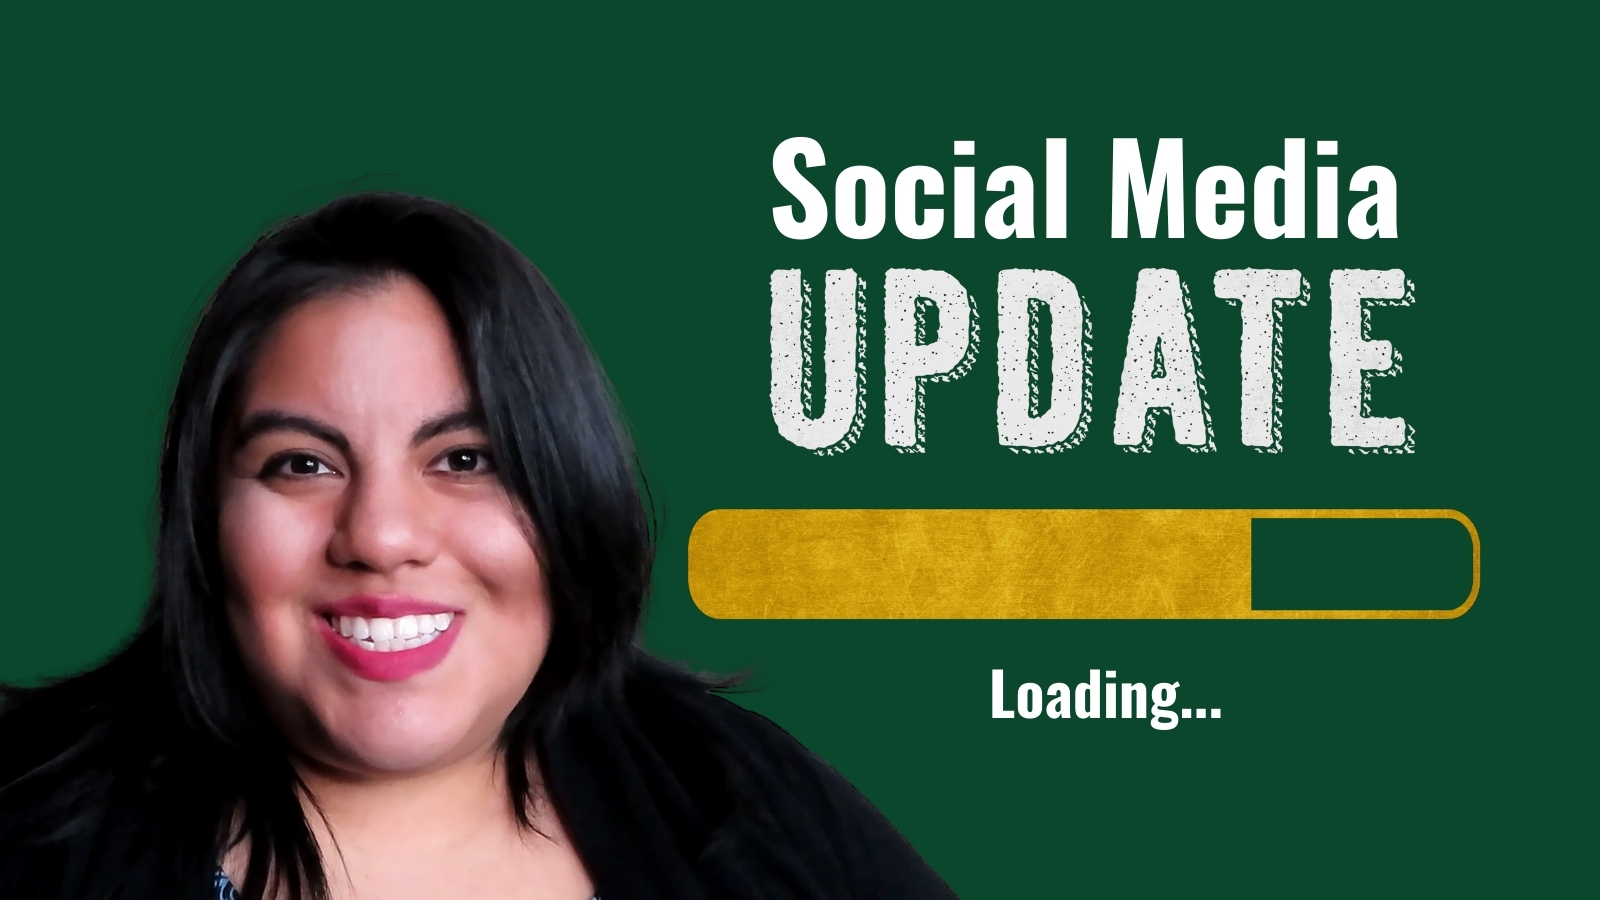 The importance of updating your name on social media platforms Full HD